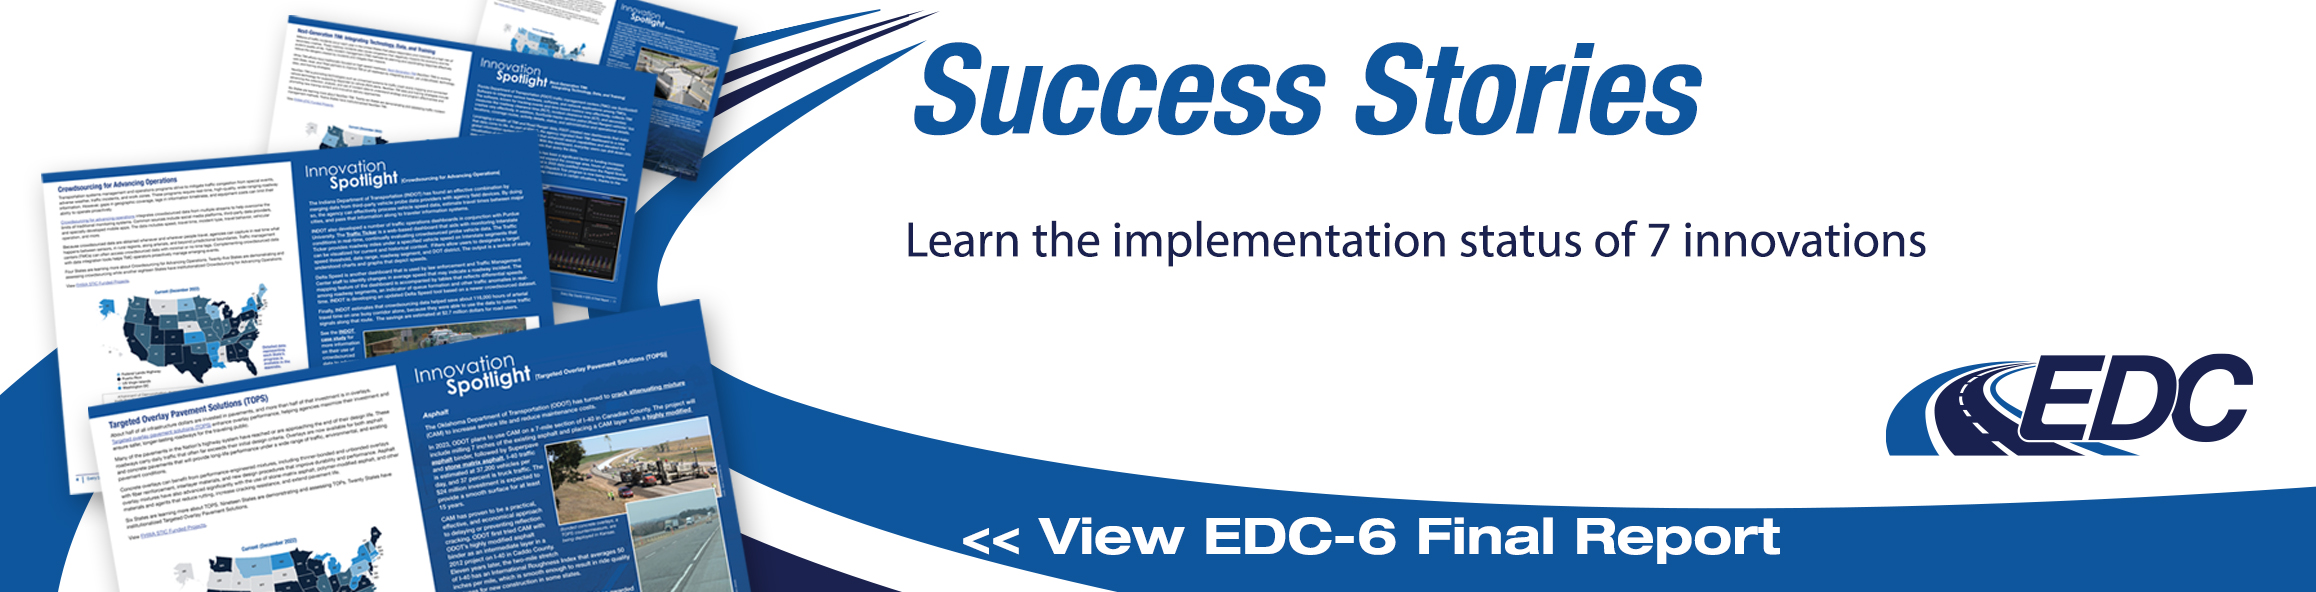 Text reads â€œSuccess Stories. Learn the implementation status of 7 innovations. View EDC-6 Final Report.â€� Image depicts pages of the report and the EDC logo.